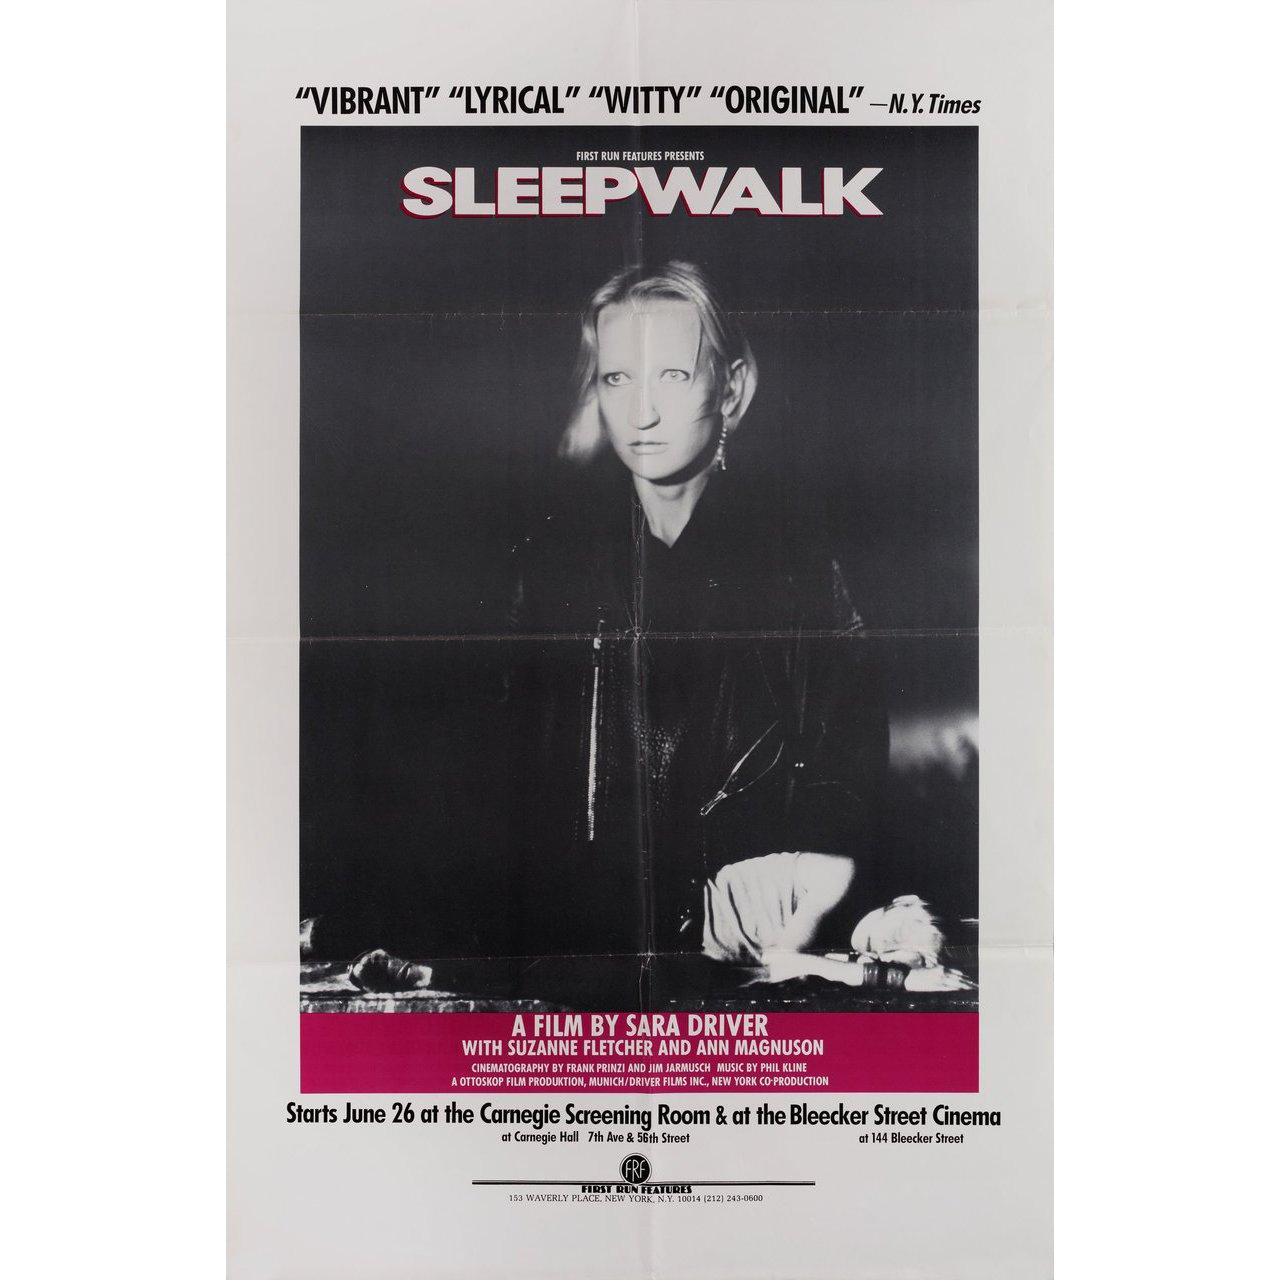 Original 1986 U.S. poster for the film Sleepwalk directed by Sara Driver with Suzanne Fletcher / Ann Magnuson / Dexter Lee / Stephen Chen. Very good-fine condition, folded. Many original posters were issued folded or were subsequently folded. Please